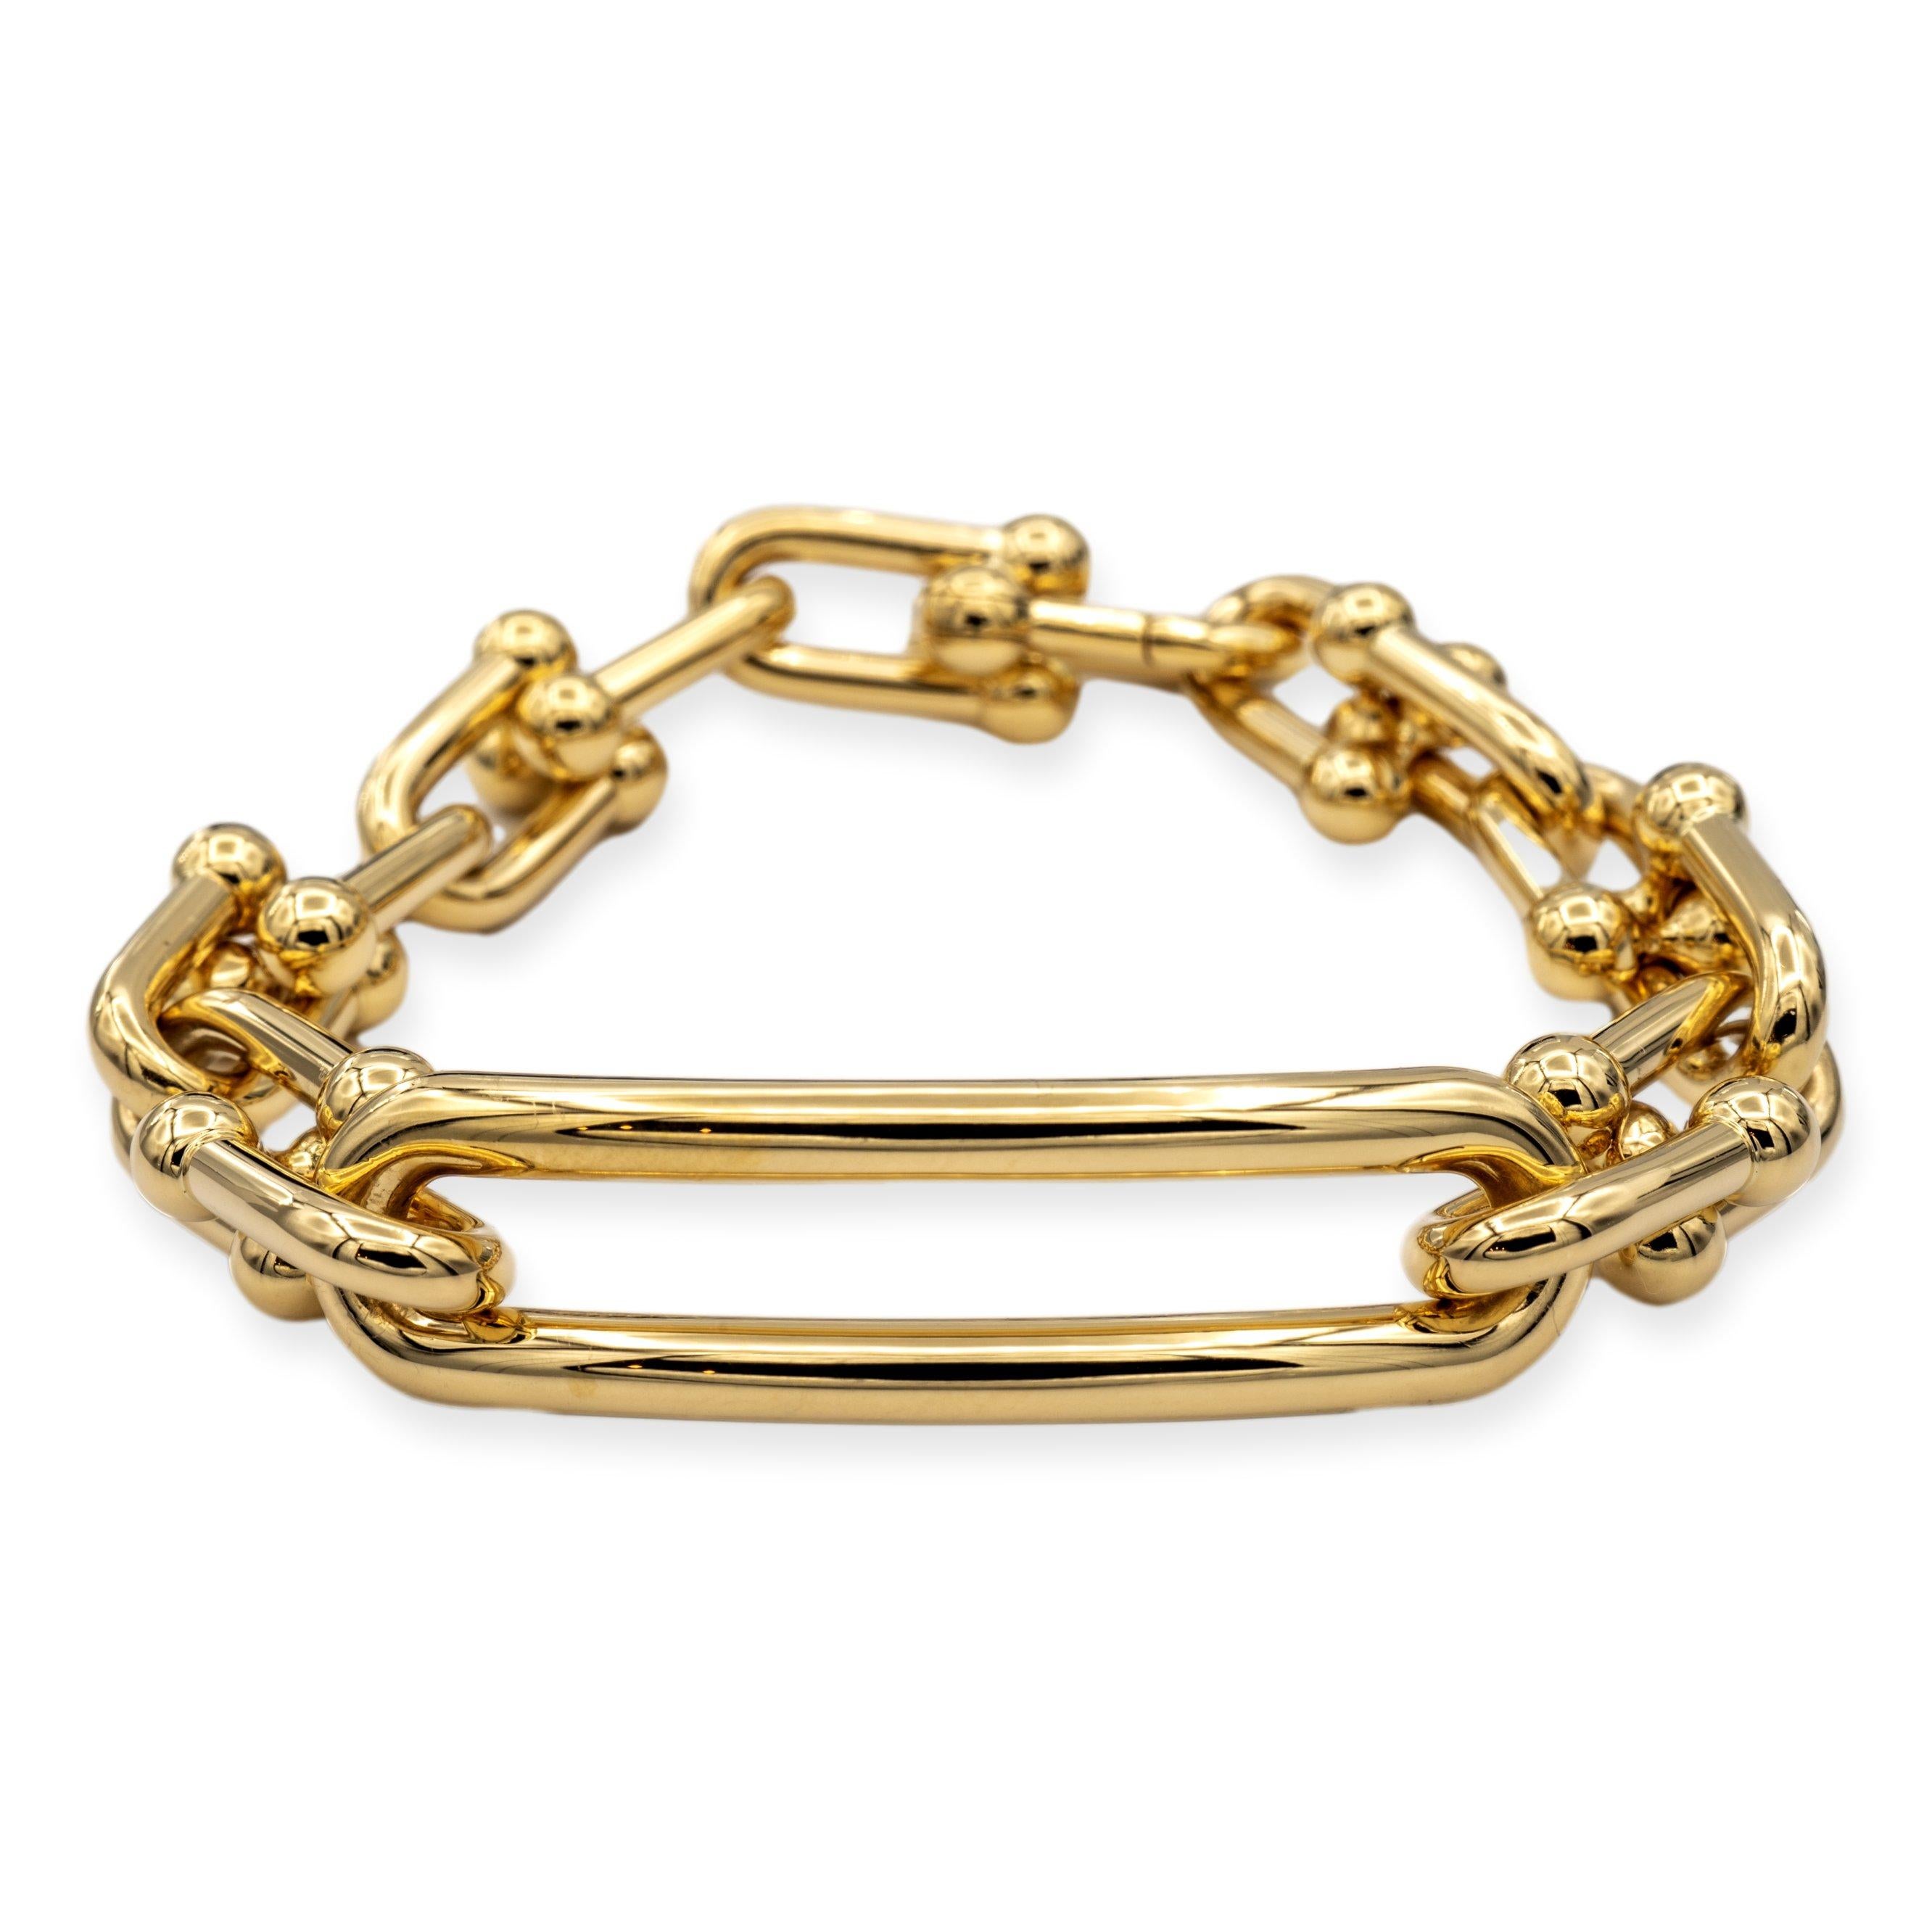 Tiffany & Co. large interlocking link bracelet from the Hardwear collection representing a bold and contemporary style that embodies modern sophistication, finely crafted in 18 Karat Yellow Gold weighing 20 grams and measuring 6.75